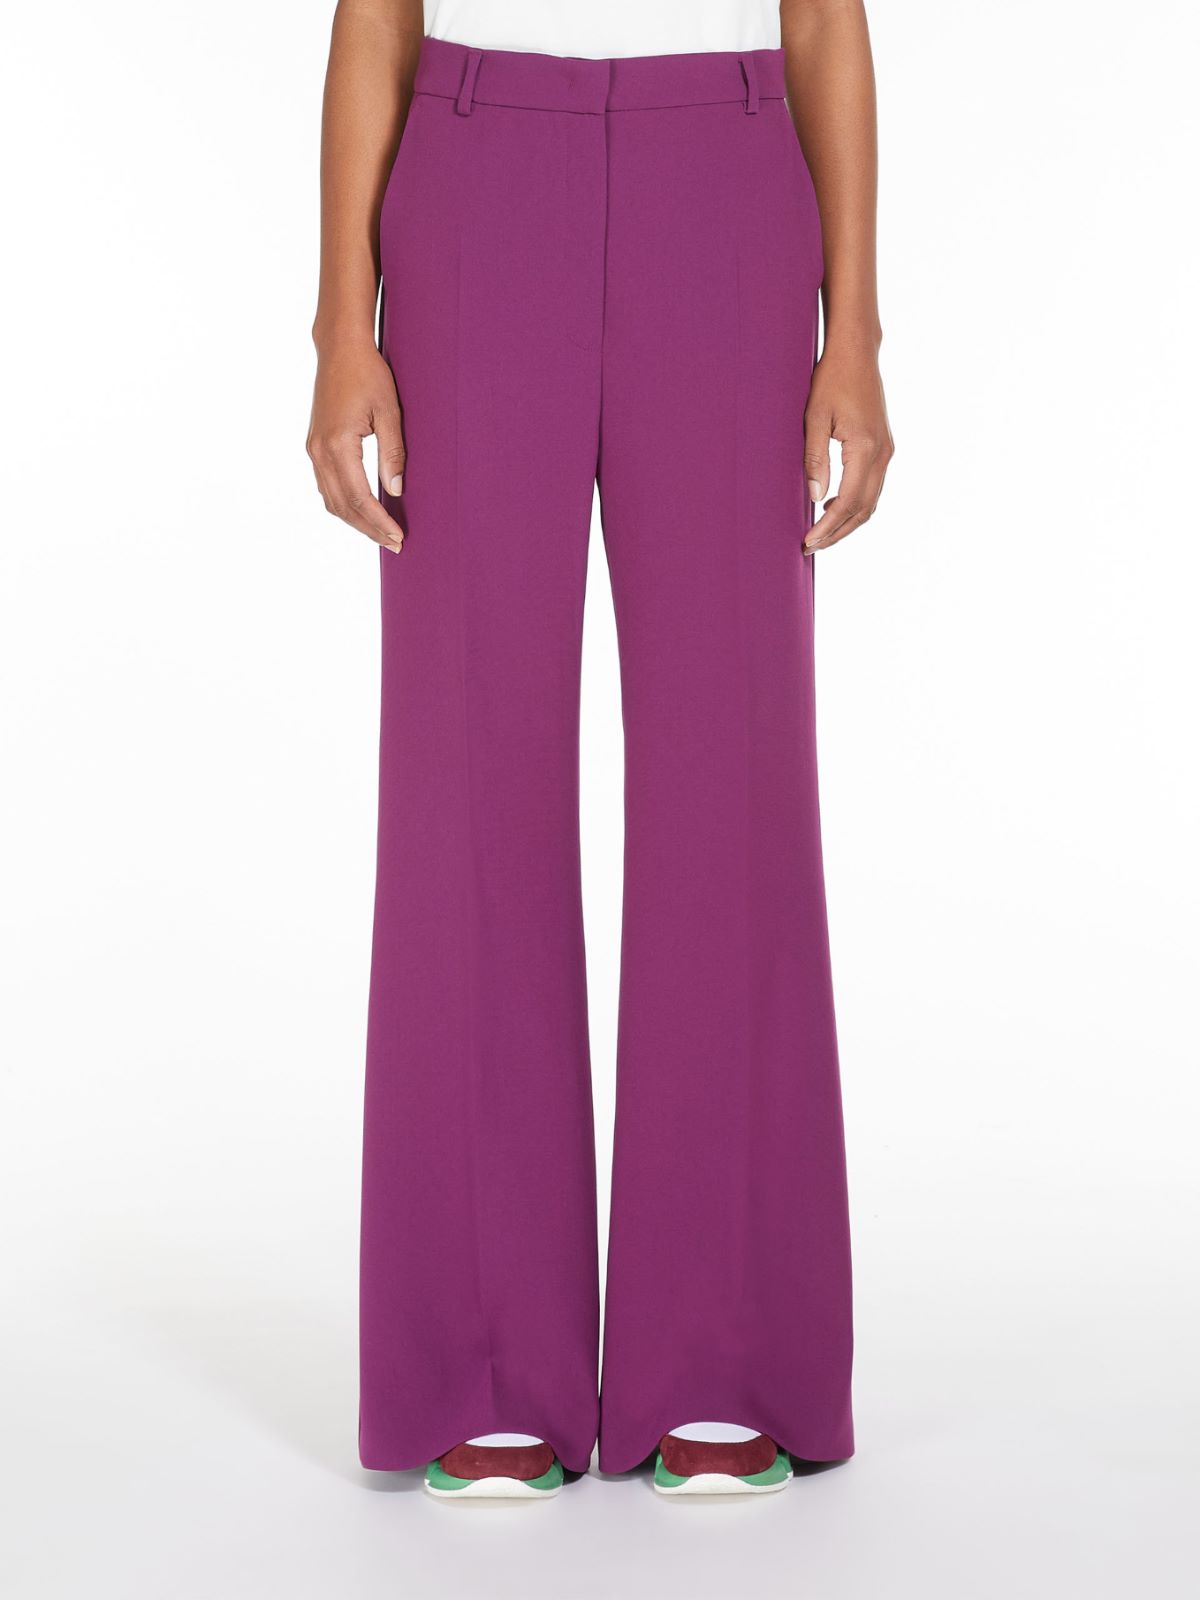 Bell bottom trousers in cady, bordeaux | Weekend Max Mara